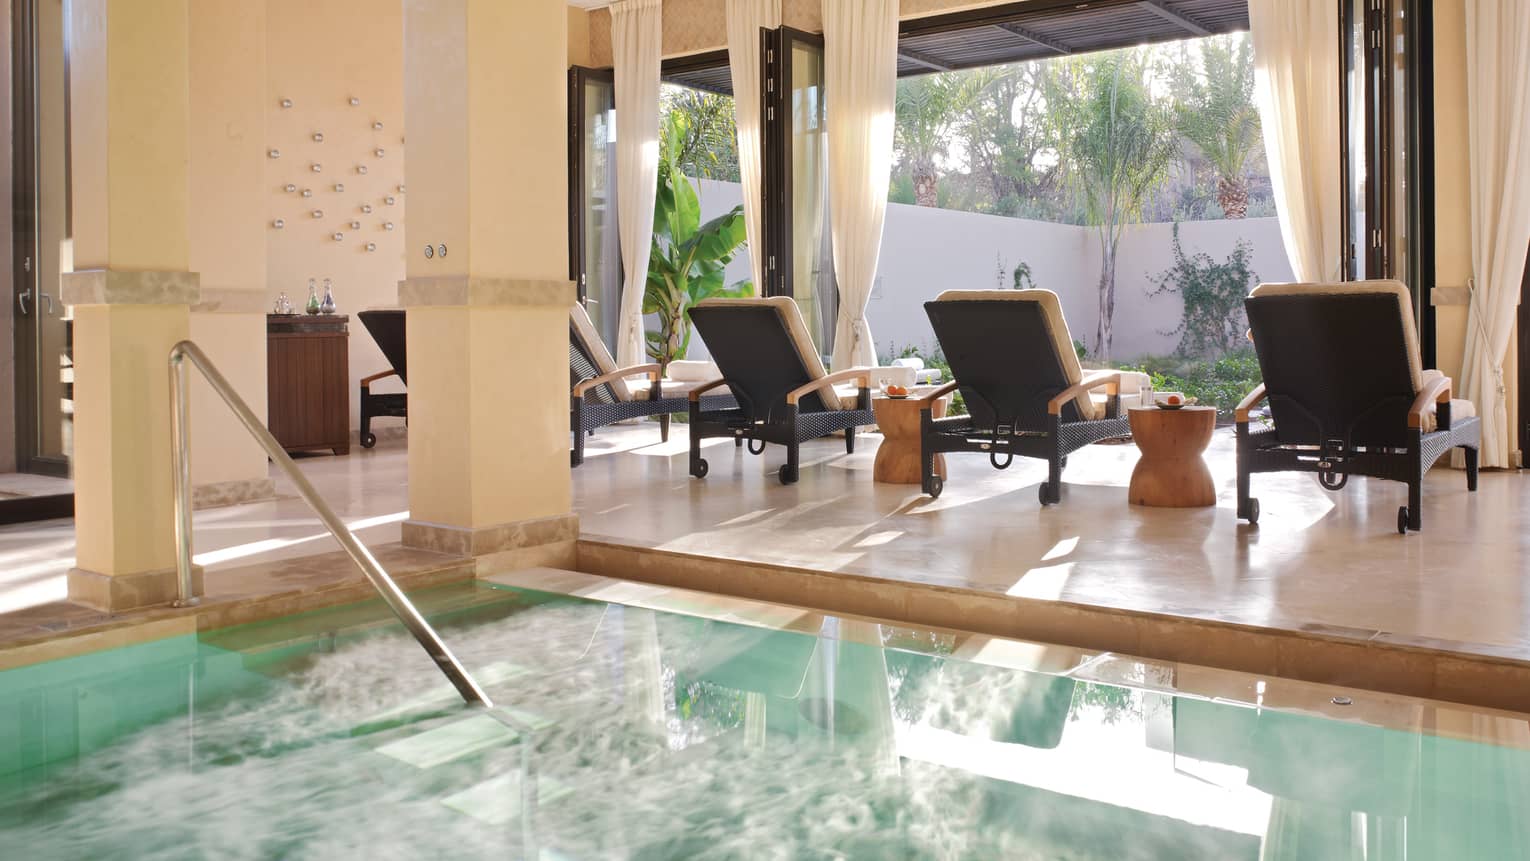 Three lounge chairs at sunny window by steps to Spa plunge pool